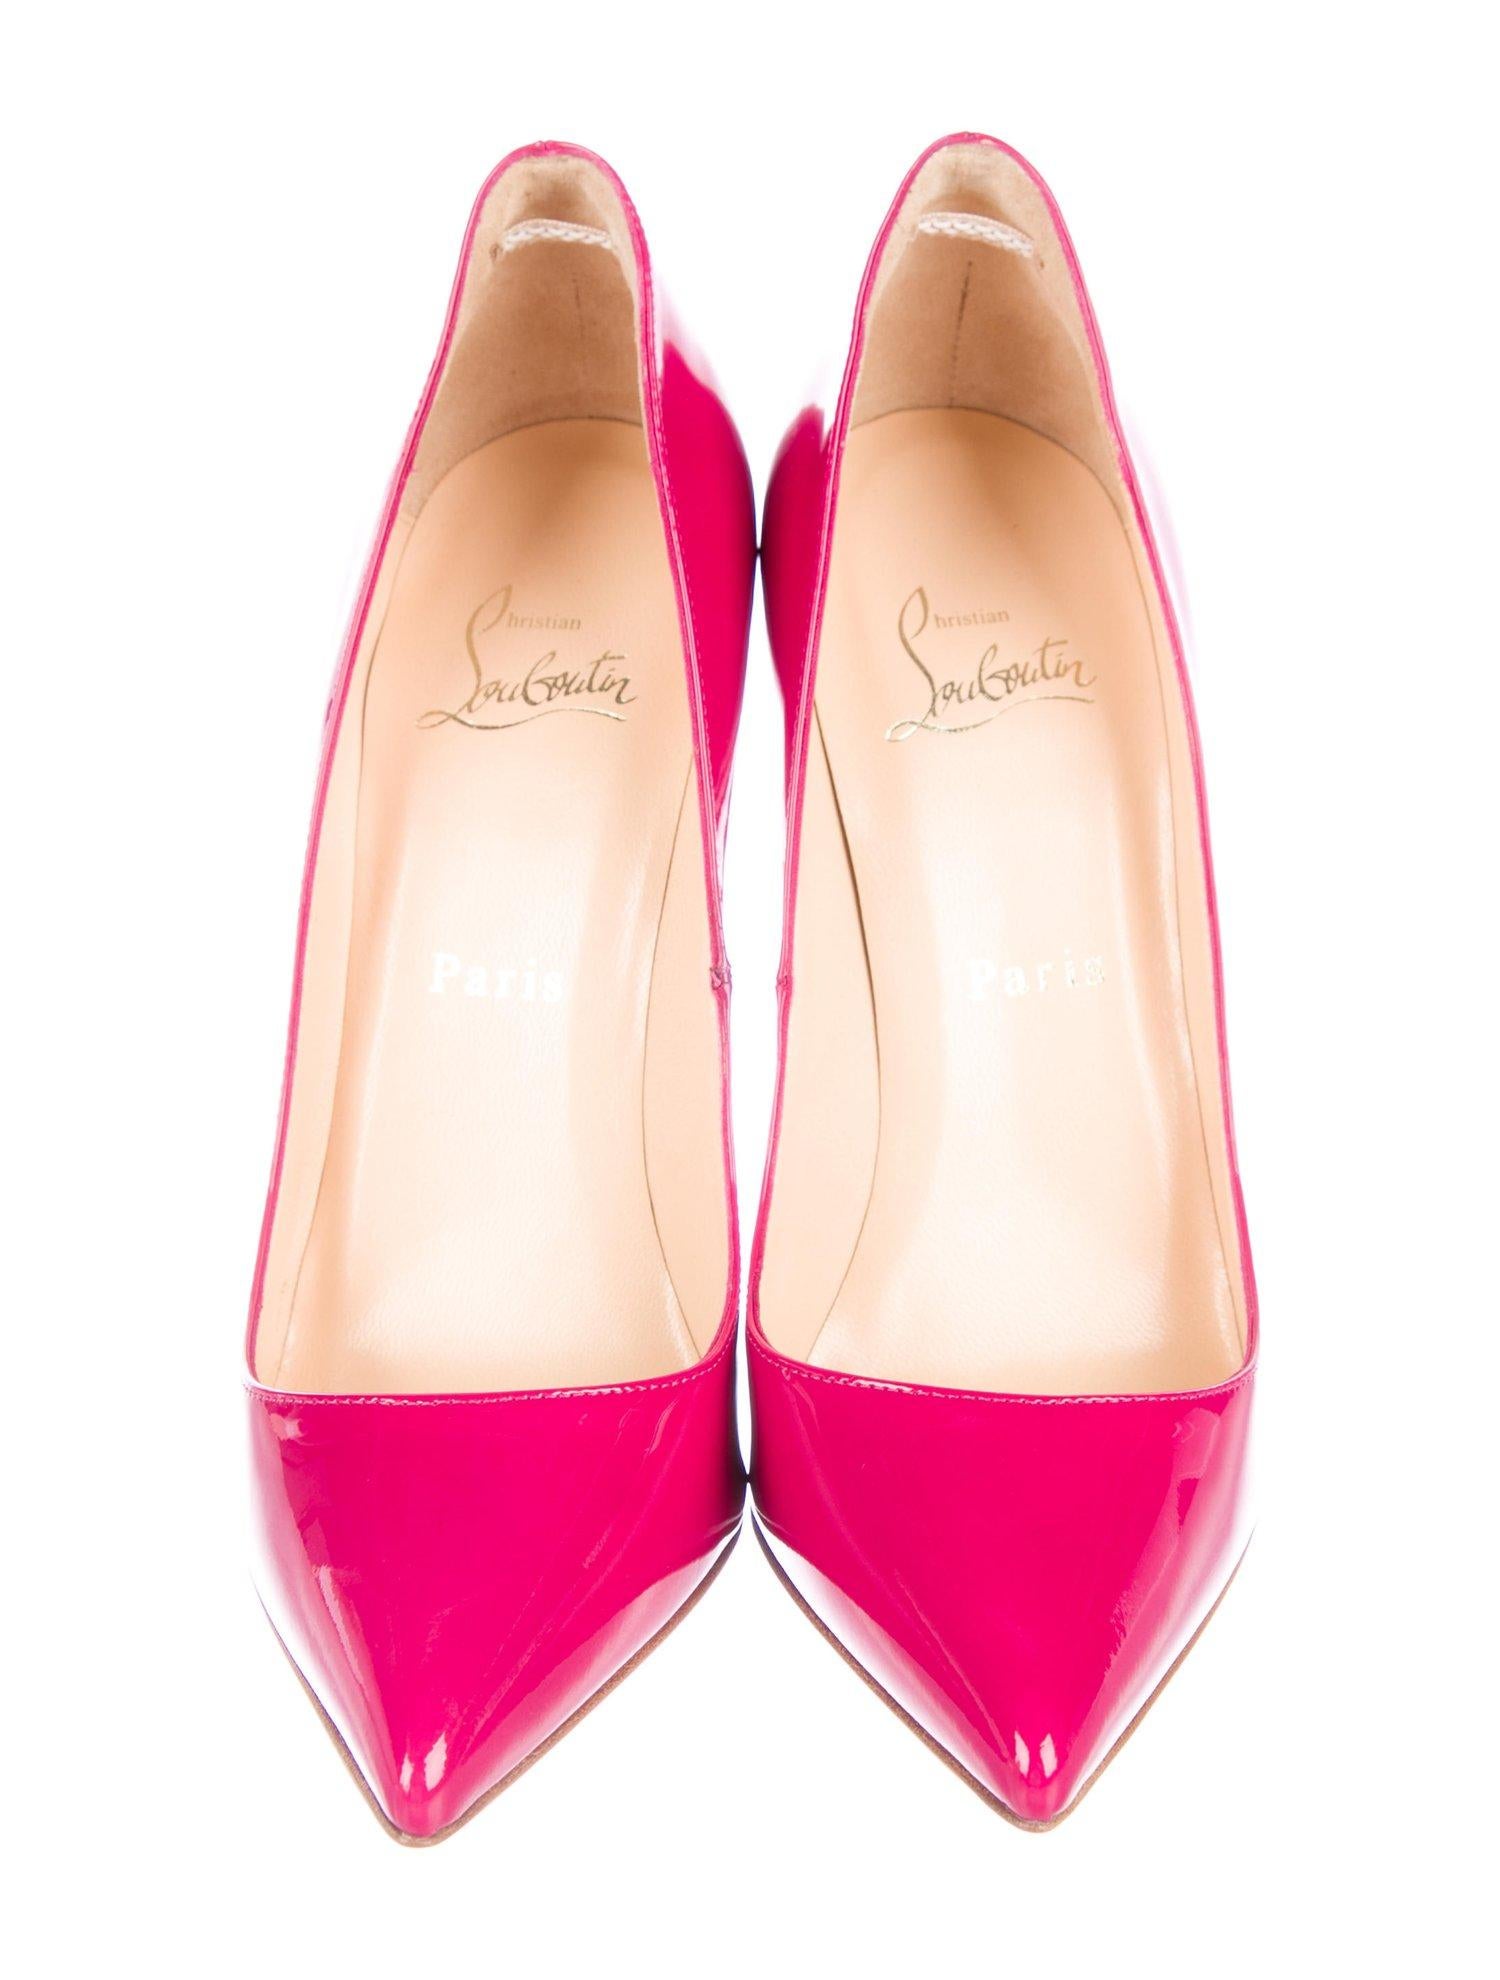 Louboutin Pigalle 120 - 5 For Sale on 1stDibs | christian louboutin pigalle  120, christian louboutin pigalle, pigalle 120mm